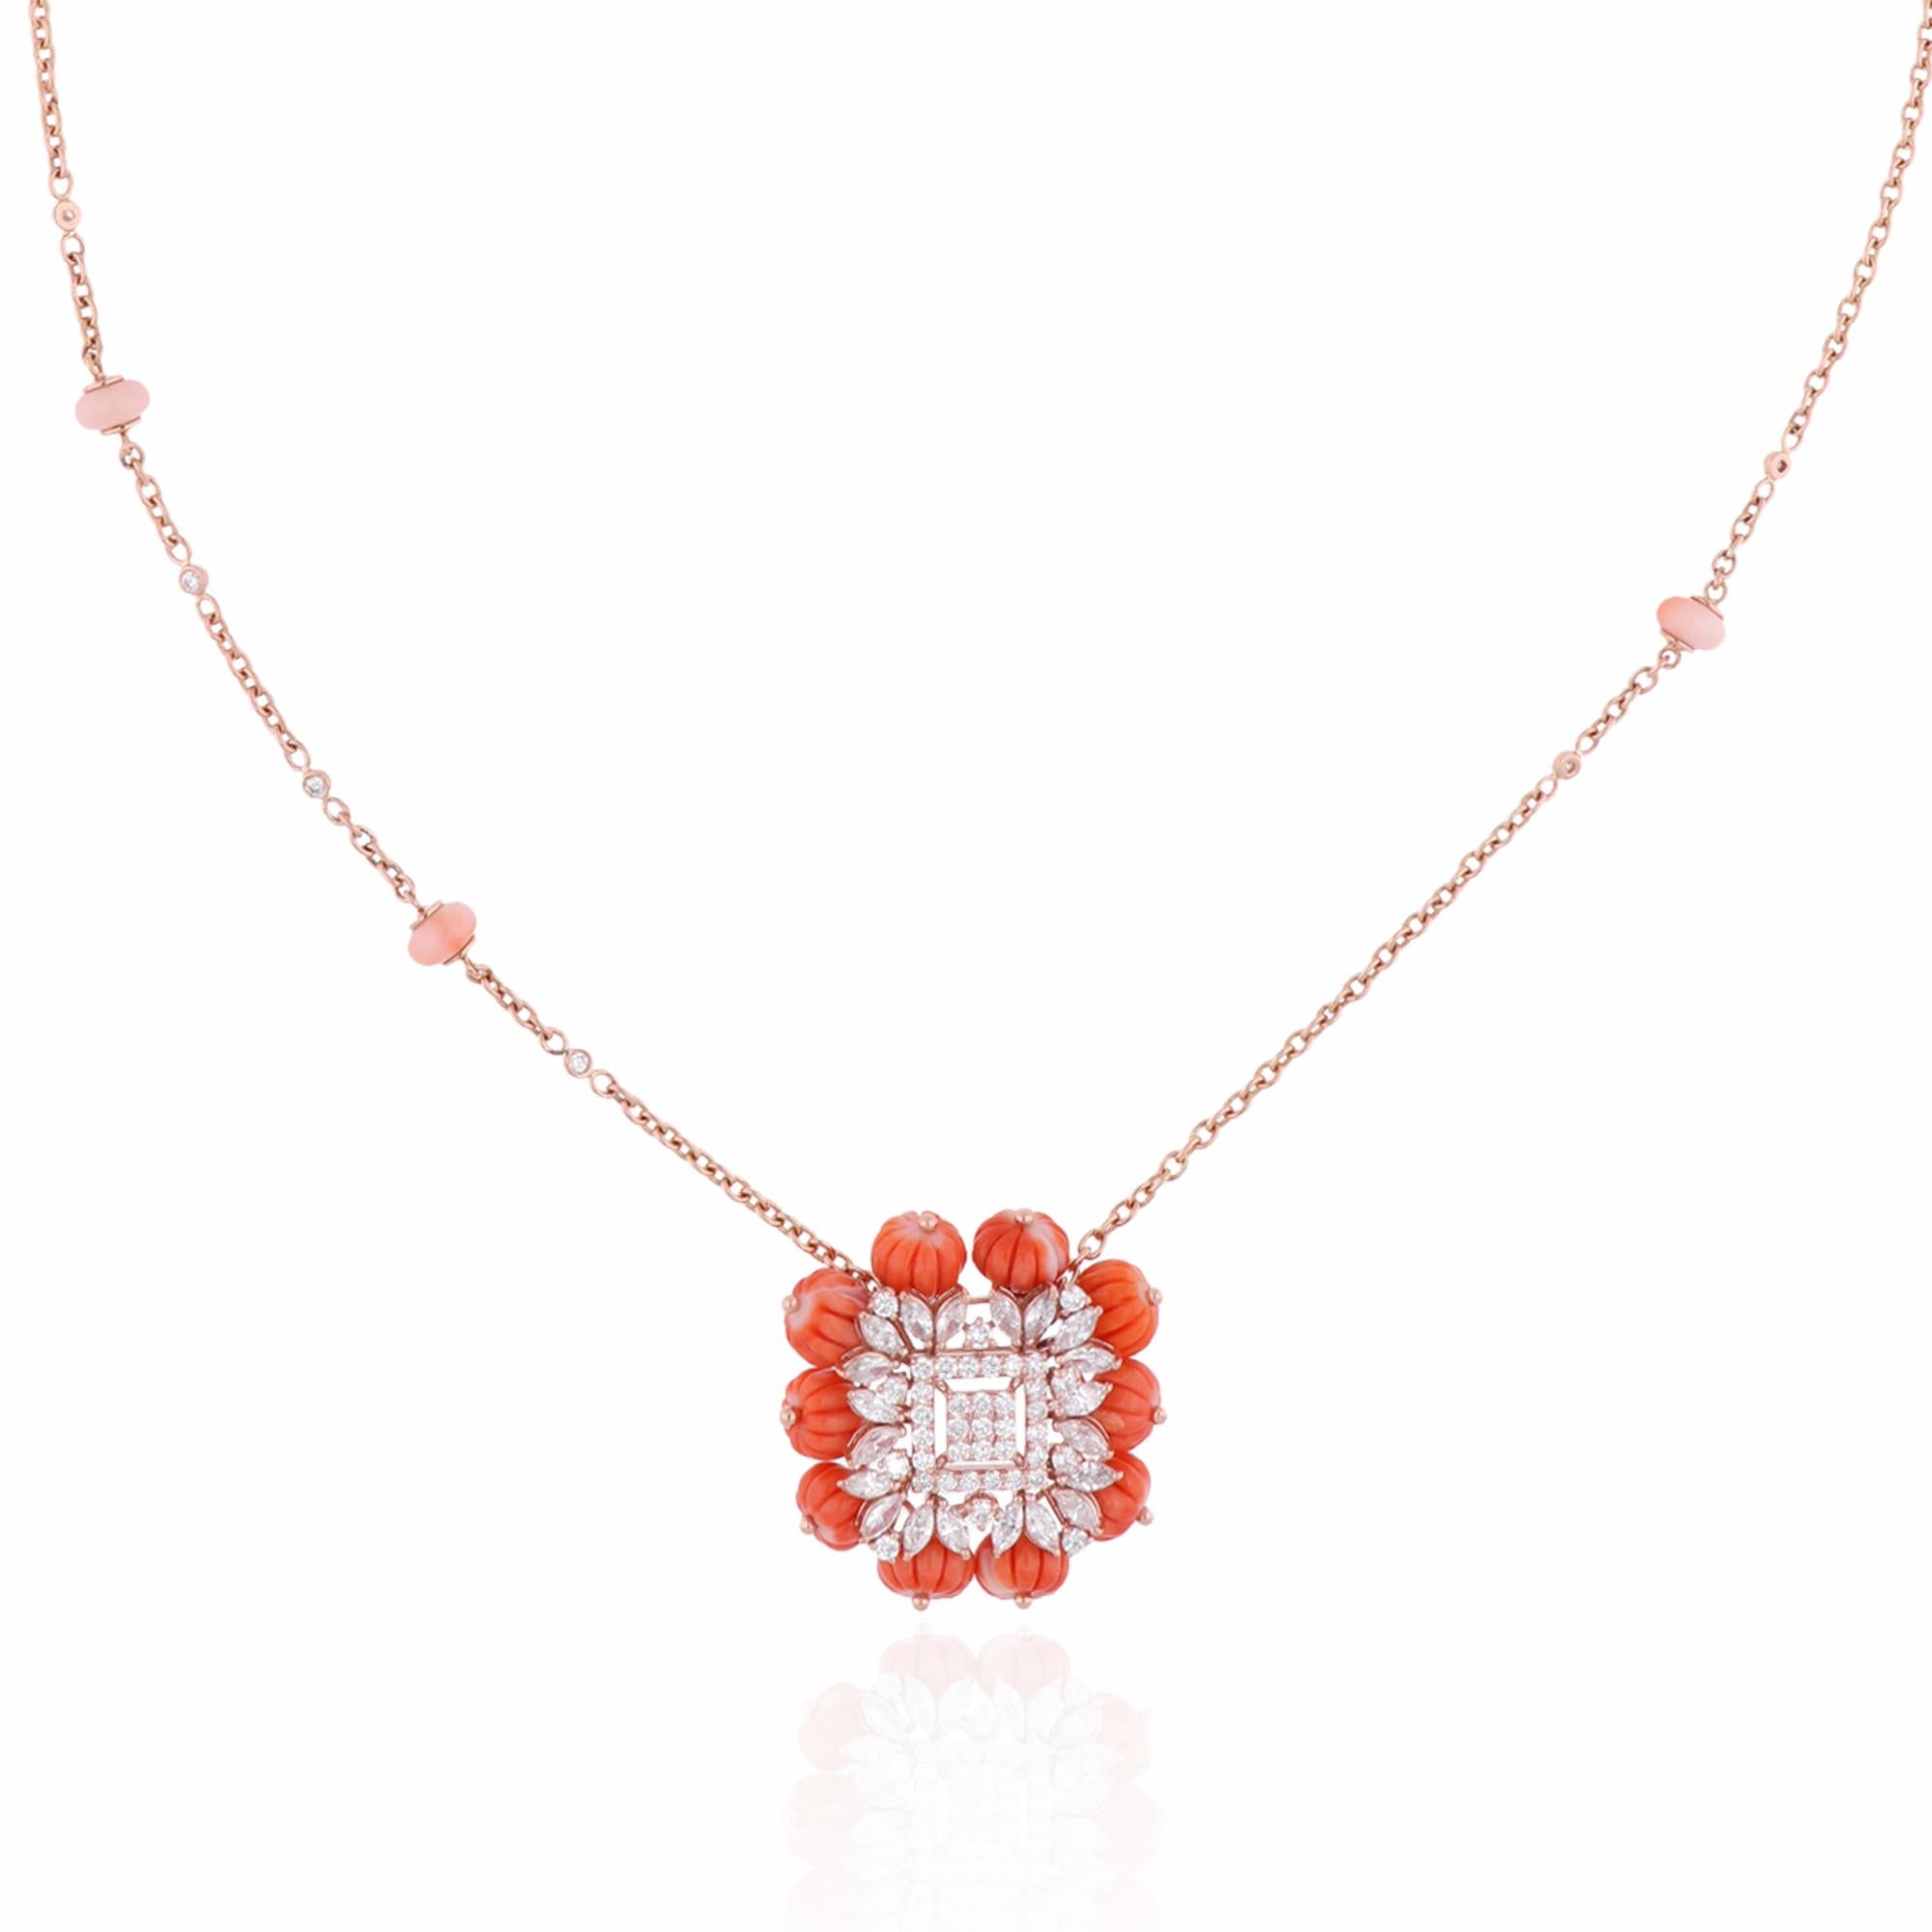 Item Code :- SEPD-3783A
Gross Wt. :- 20.96 gm
18k Rose Gold Wt. :- 17.60 gm
Natural Diamond Wt. :- 2.96 Ct. ( AVERAGE DIAMOND CLARITY SI1-SI2 & COLOR H-I )
Coral Beads Wt. :- 13.84 Ct.
Necklace Length :- 16 Inches Long

✦